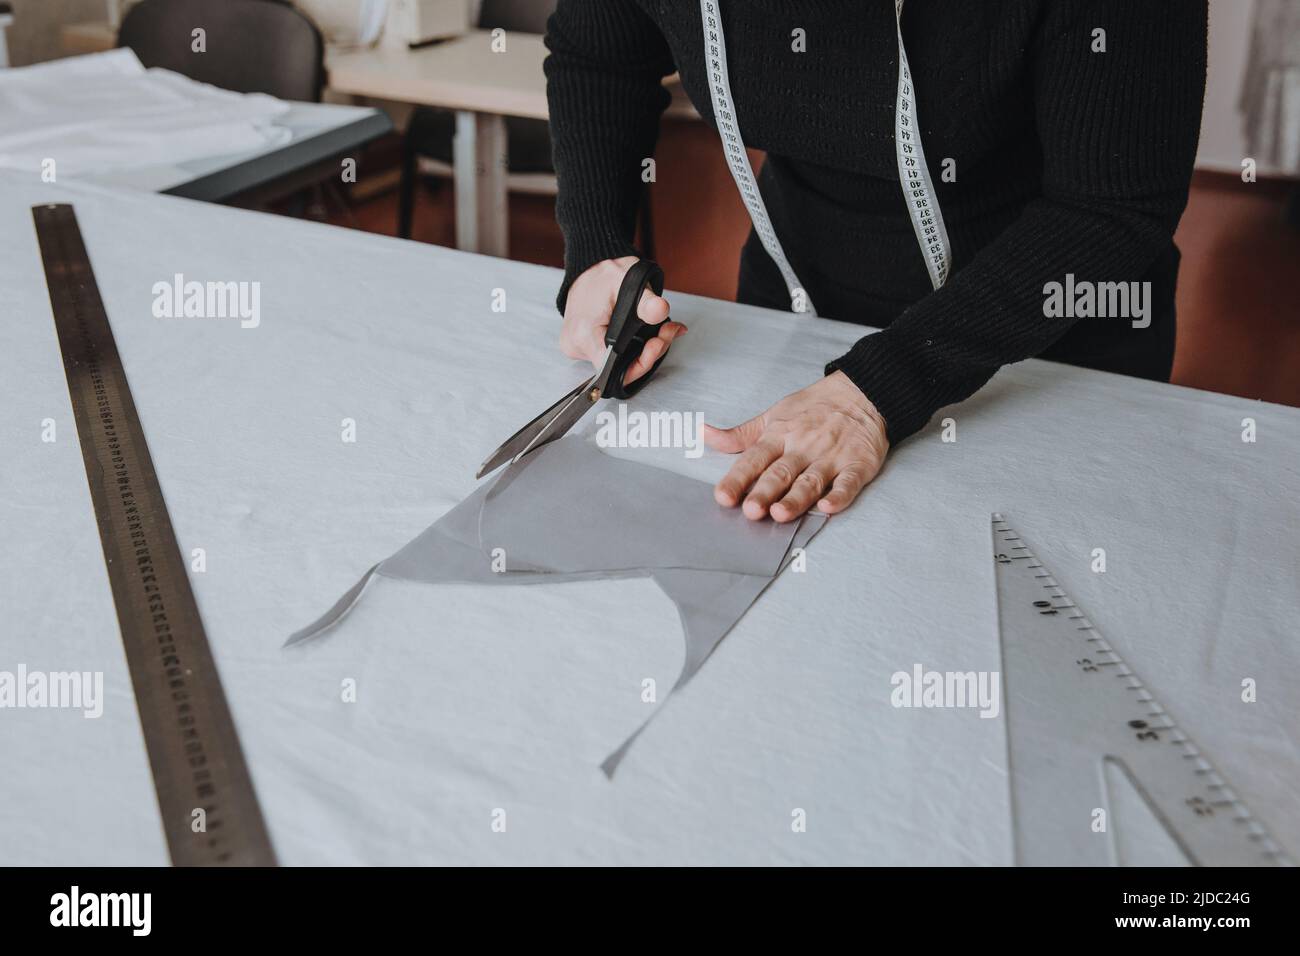 Tailor designer working of cutting piece of cloth with scissors, a triangle and a ruler lie on the table nearby, entrepreneur concept. Stock Photo